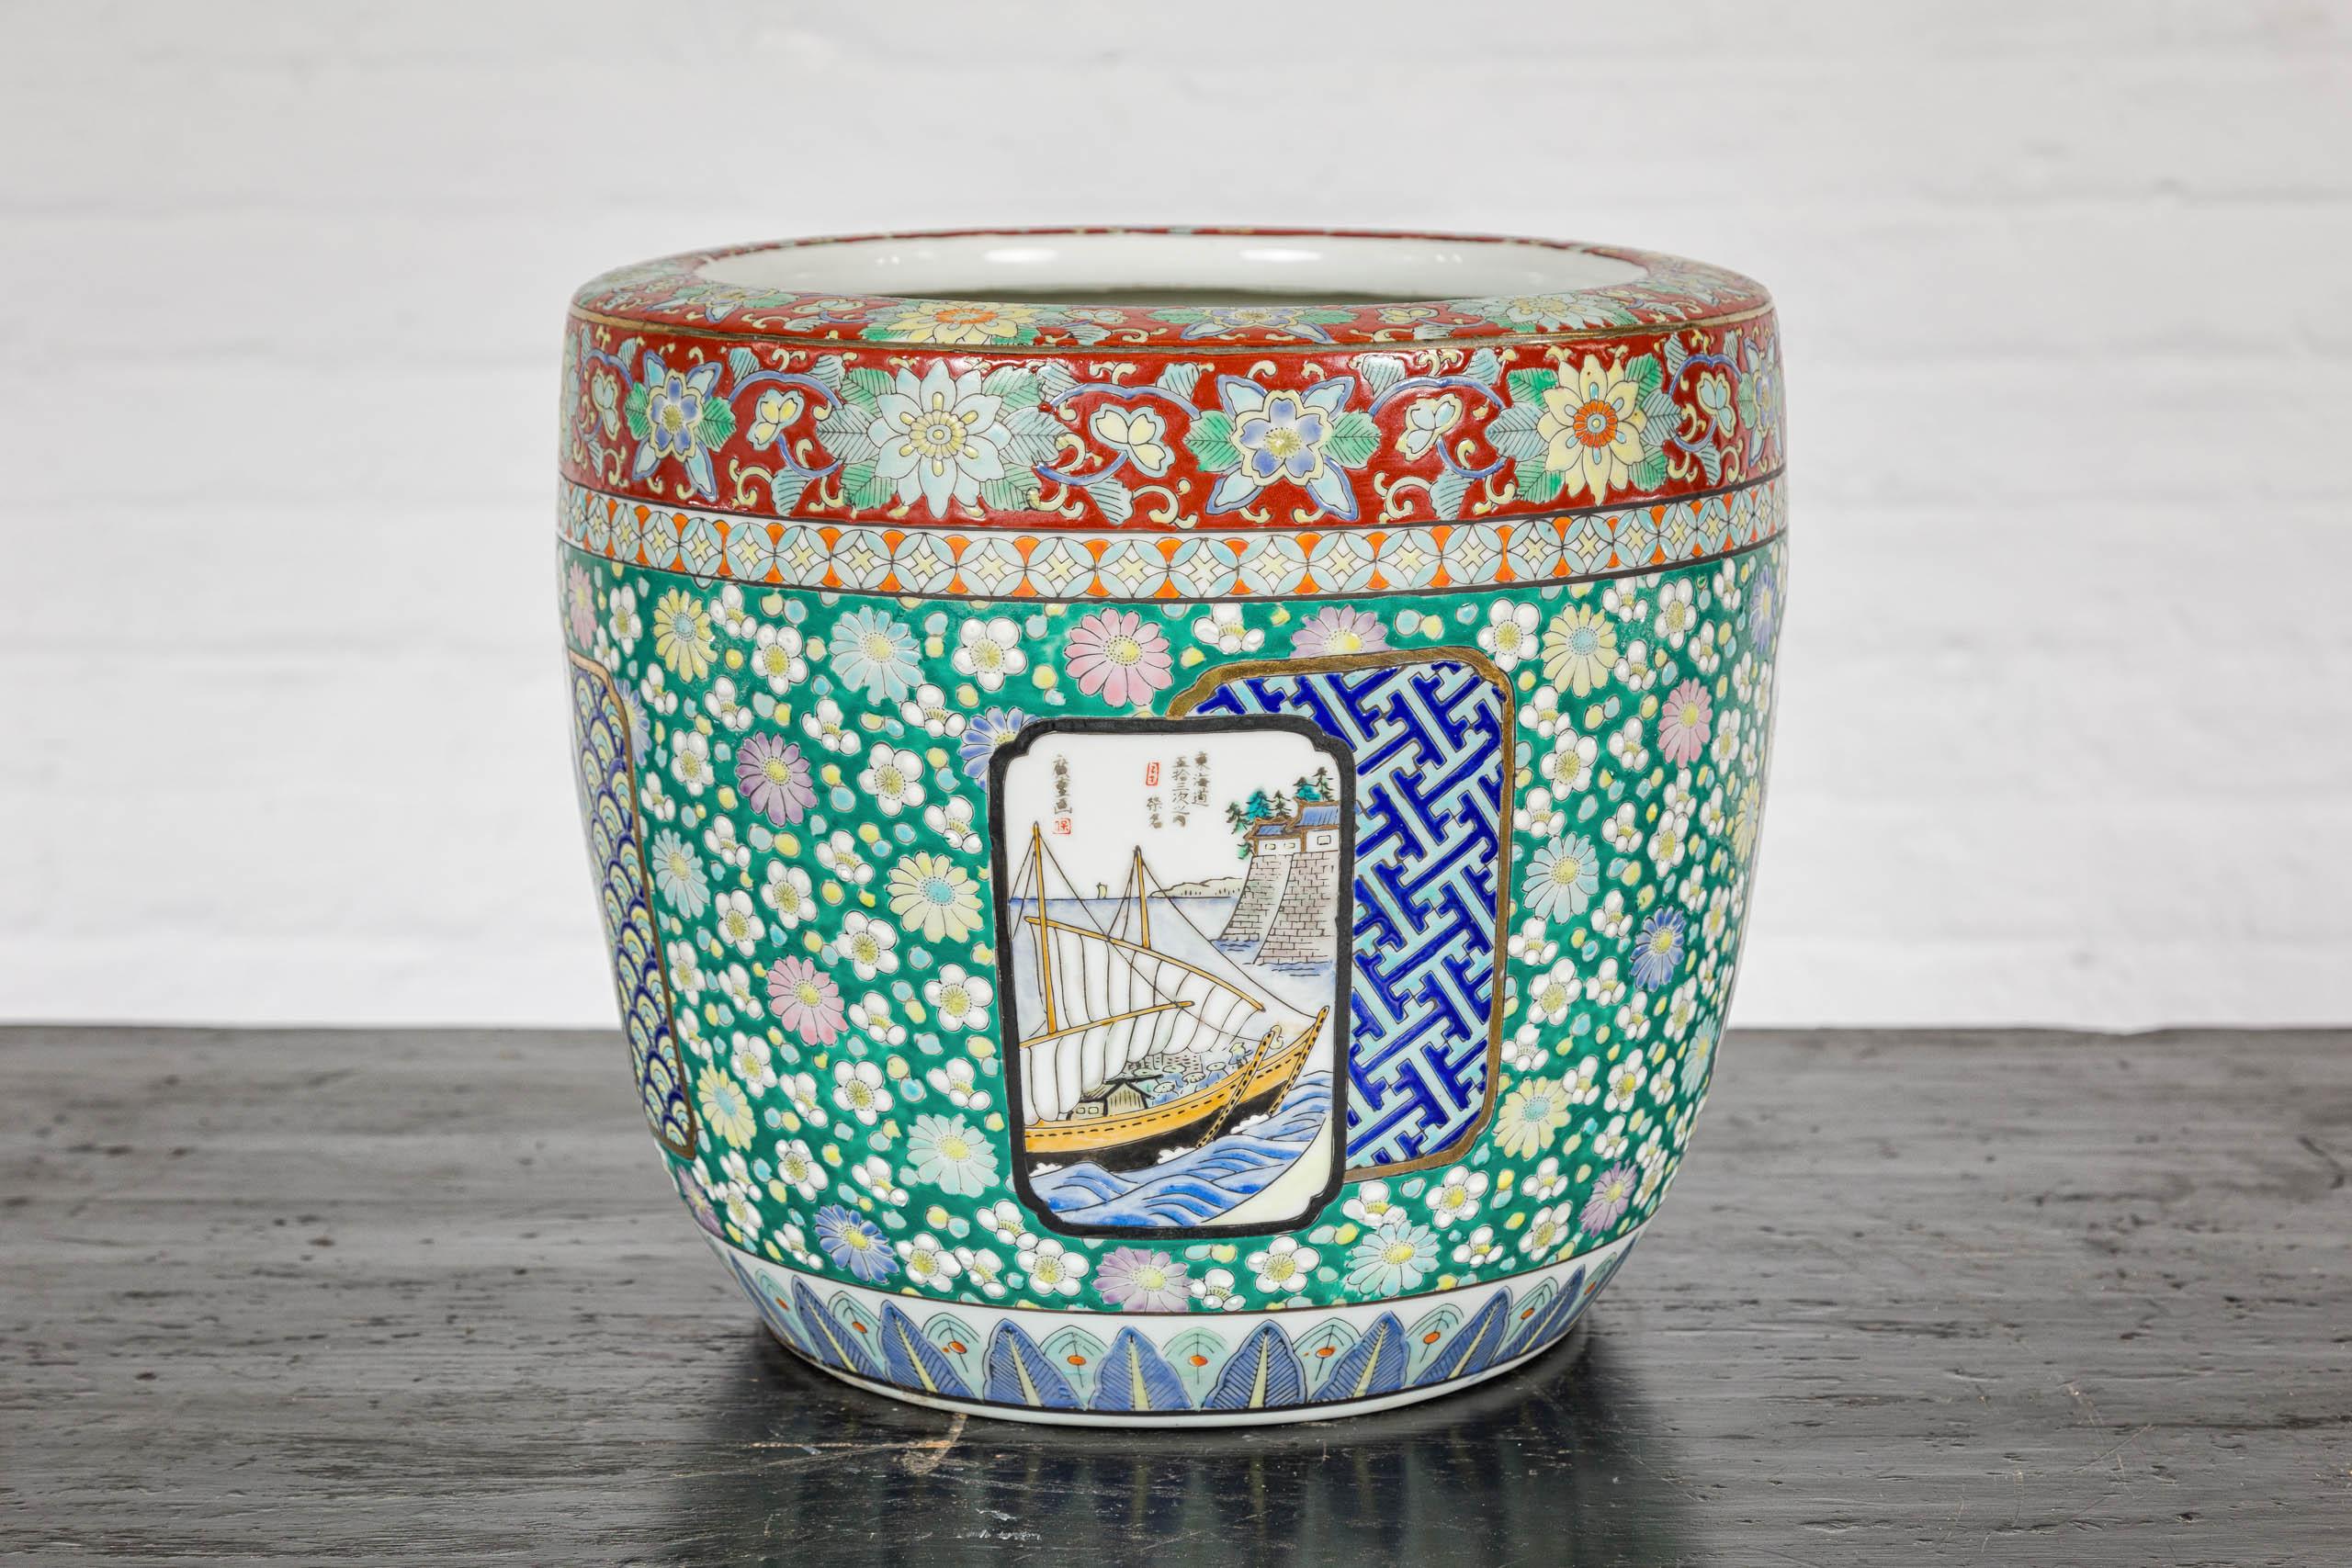 Porcelain Japanese Hand-Painted Imari Planter with Boat, Mountains, People and Flowers For Sale